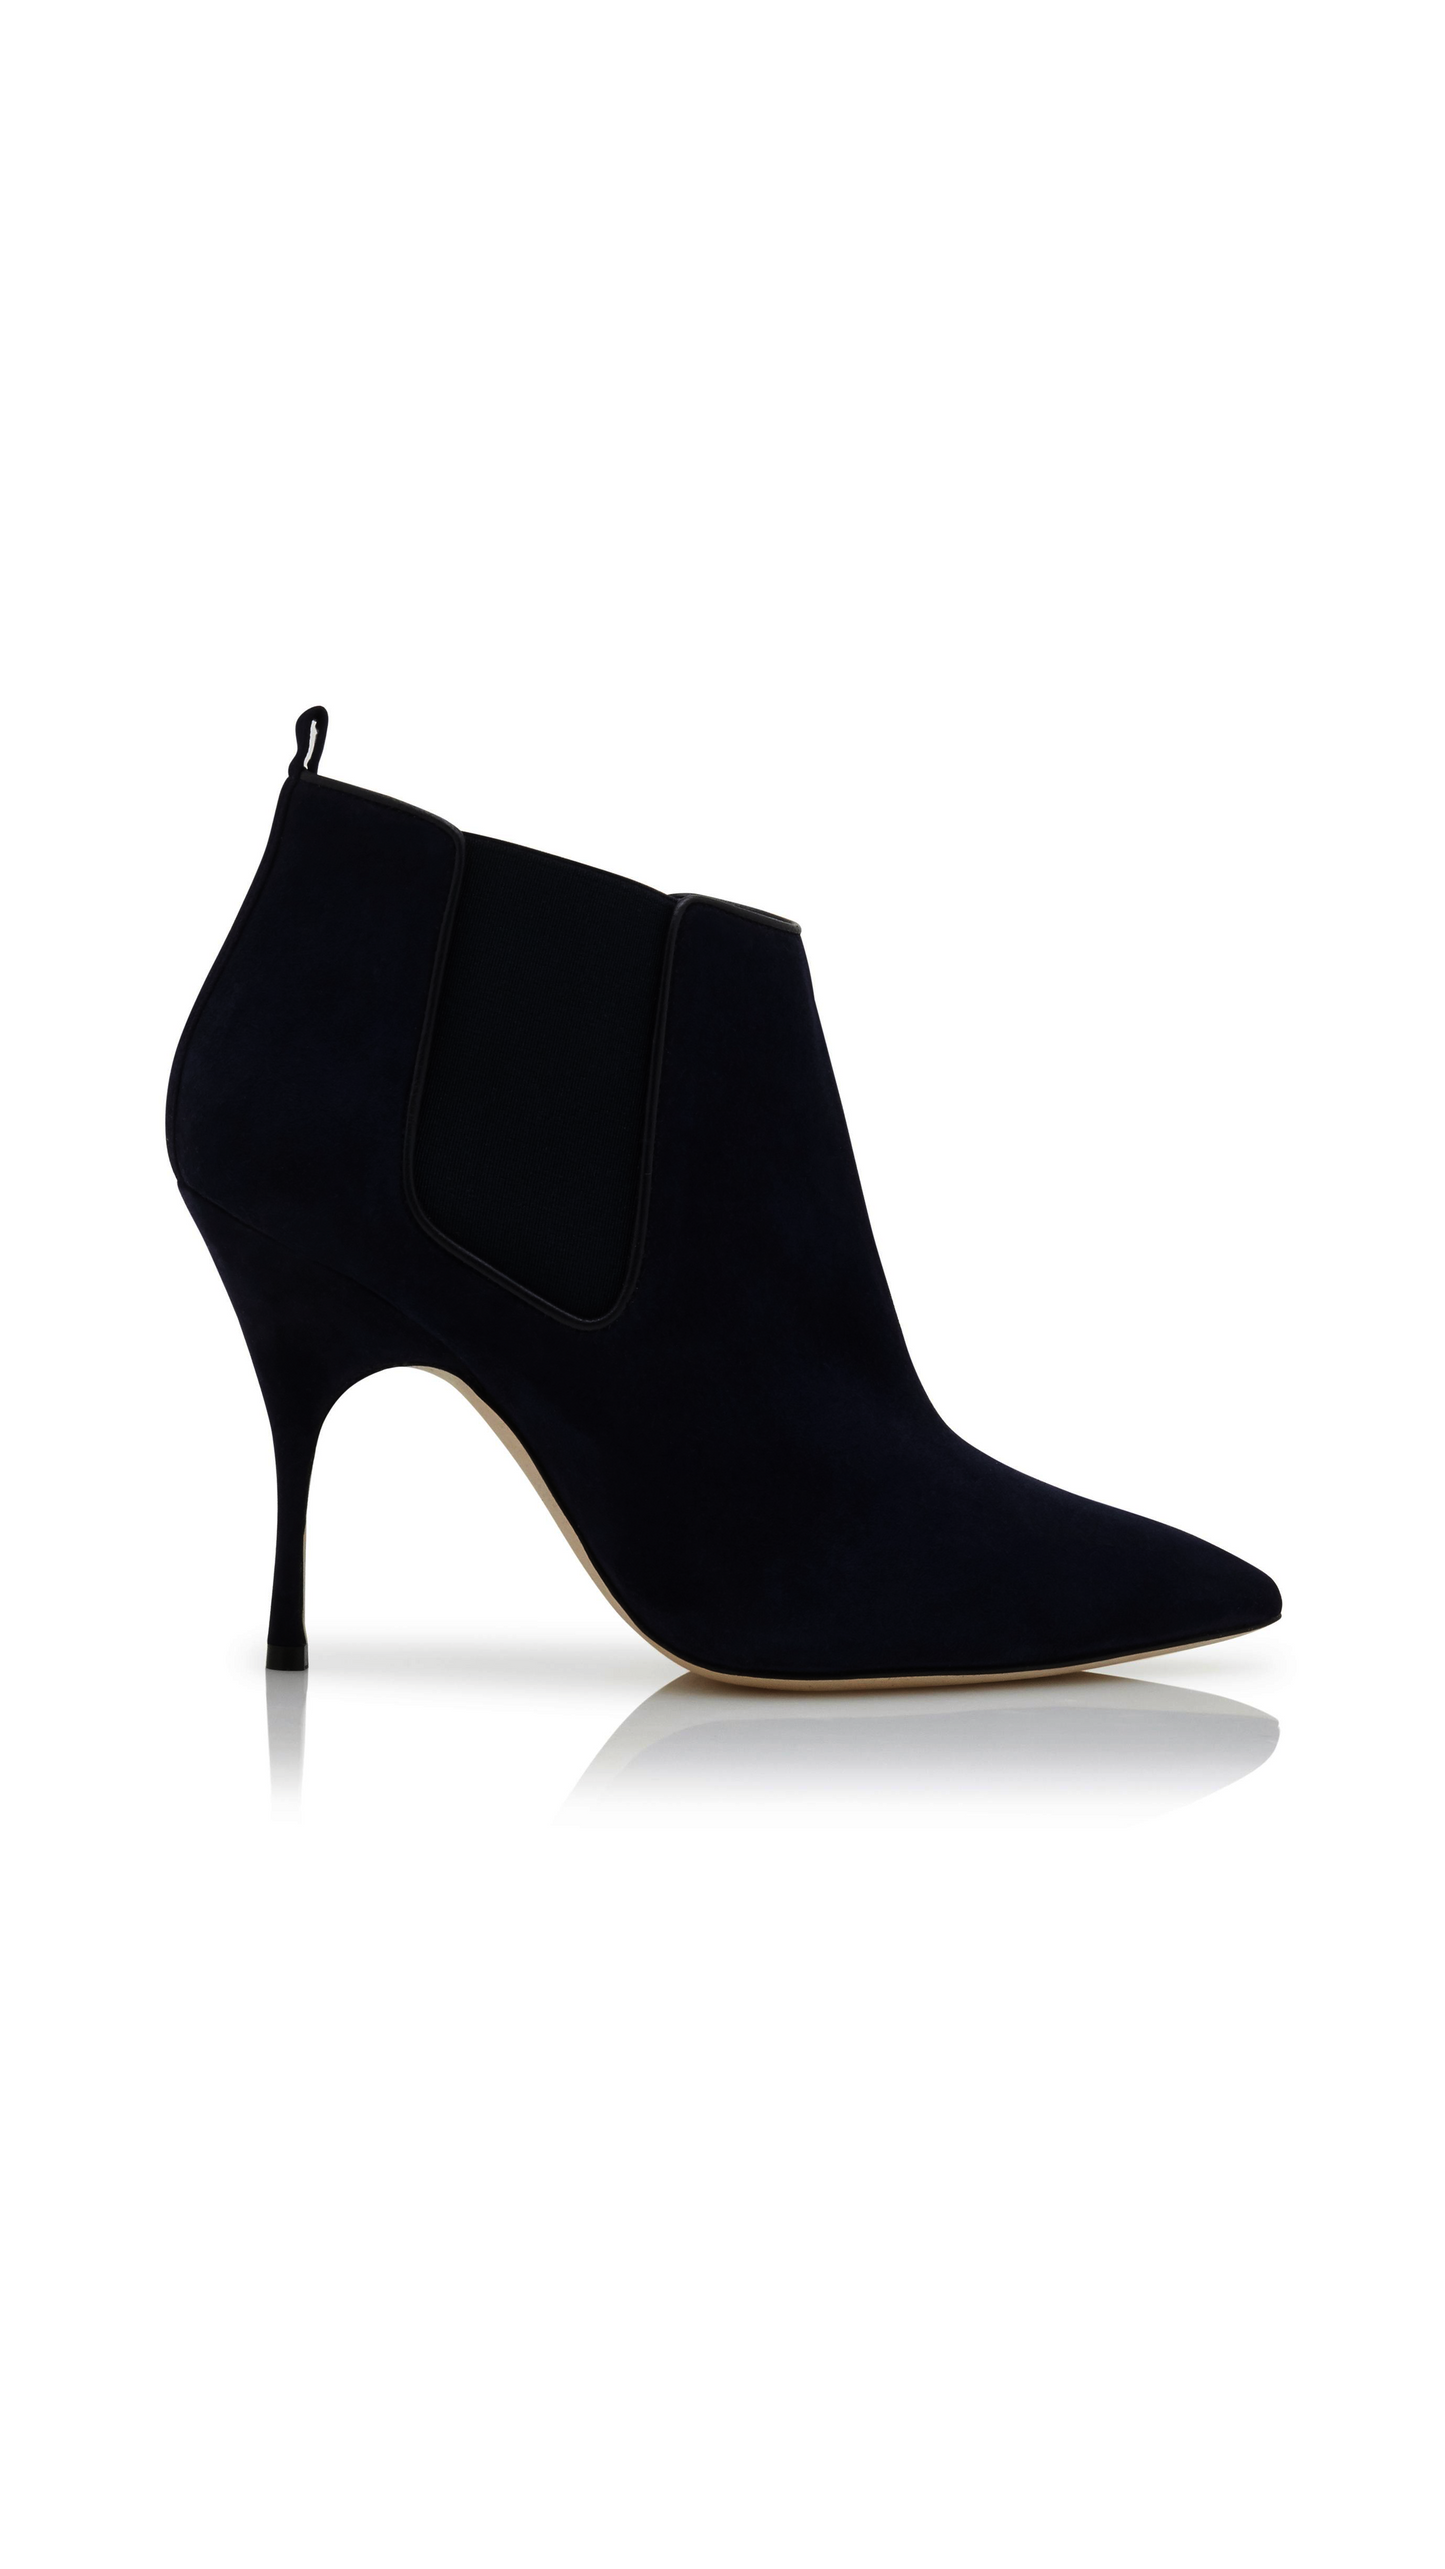 Dildi Ankle Boots - Black